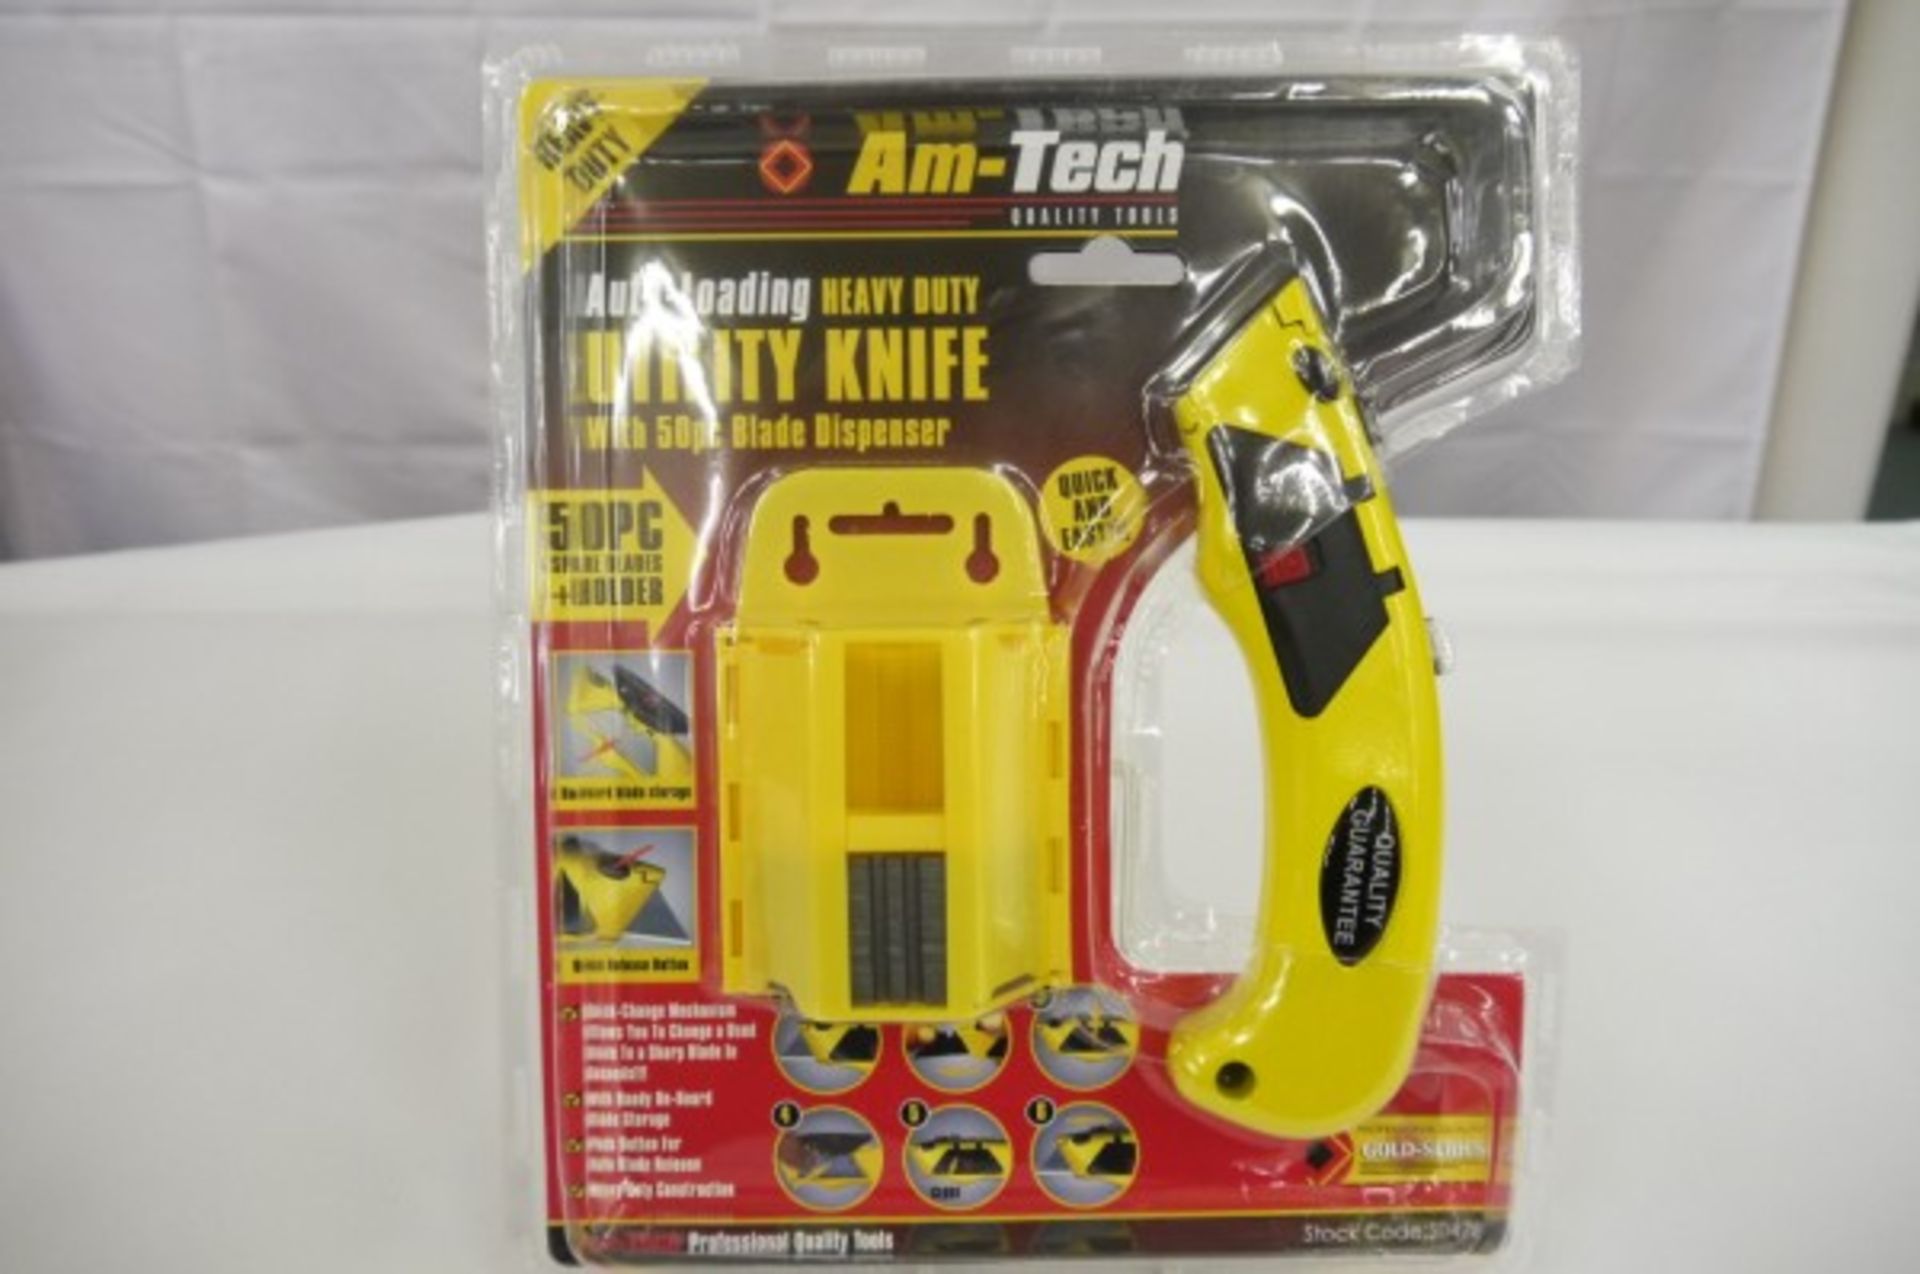 V *TRADE QTY* Brand New Auto Loading Utility With 50 Piece Blade Dispenser X 12 YOUR BID PRICE TO BE